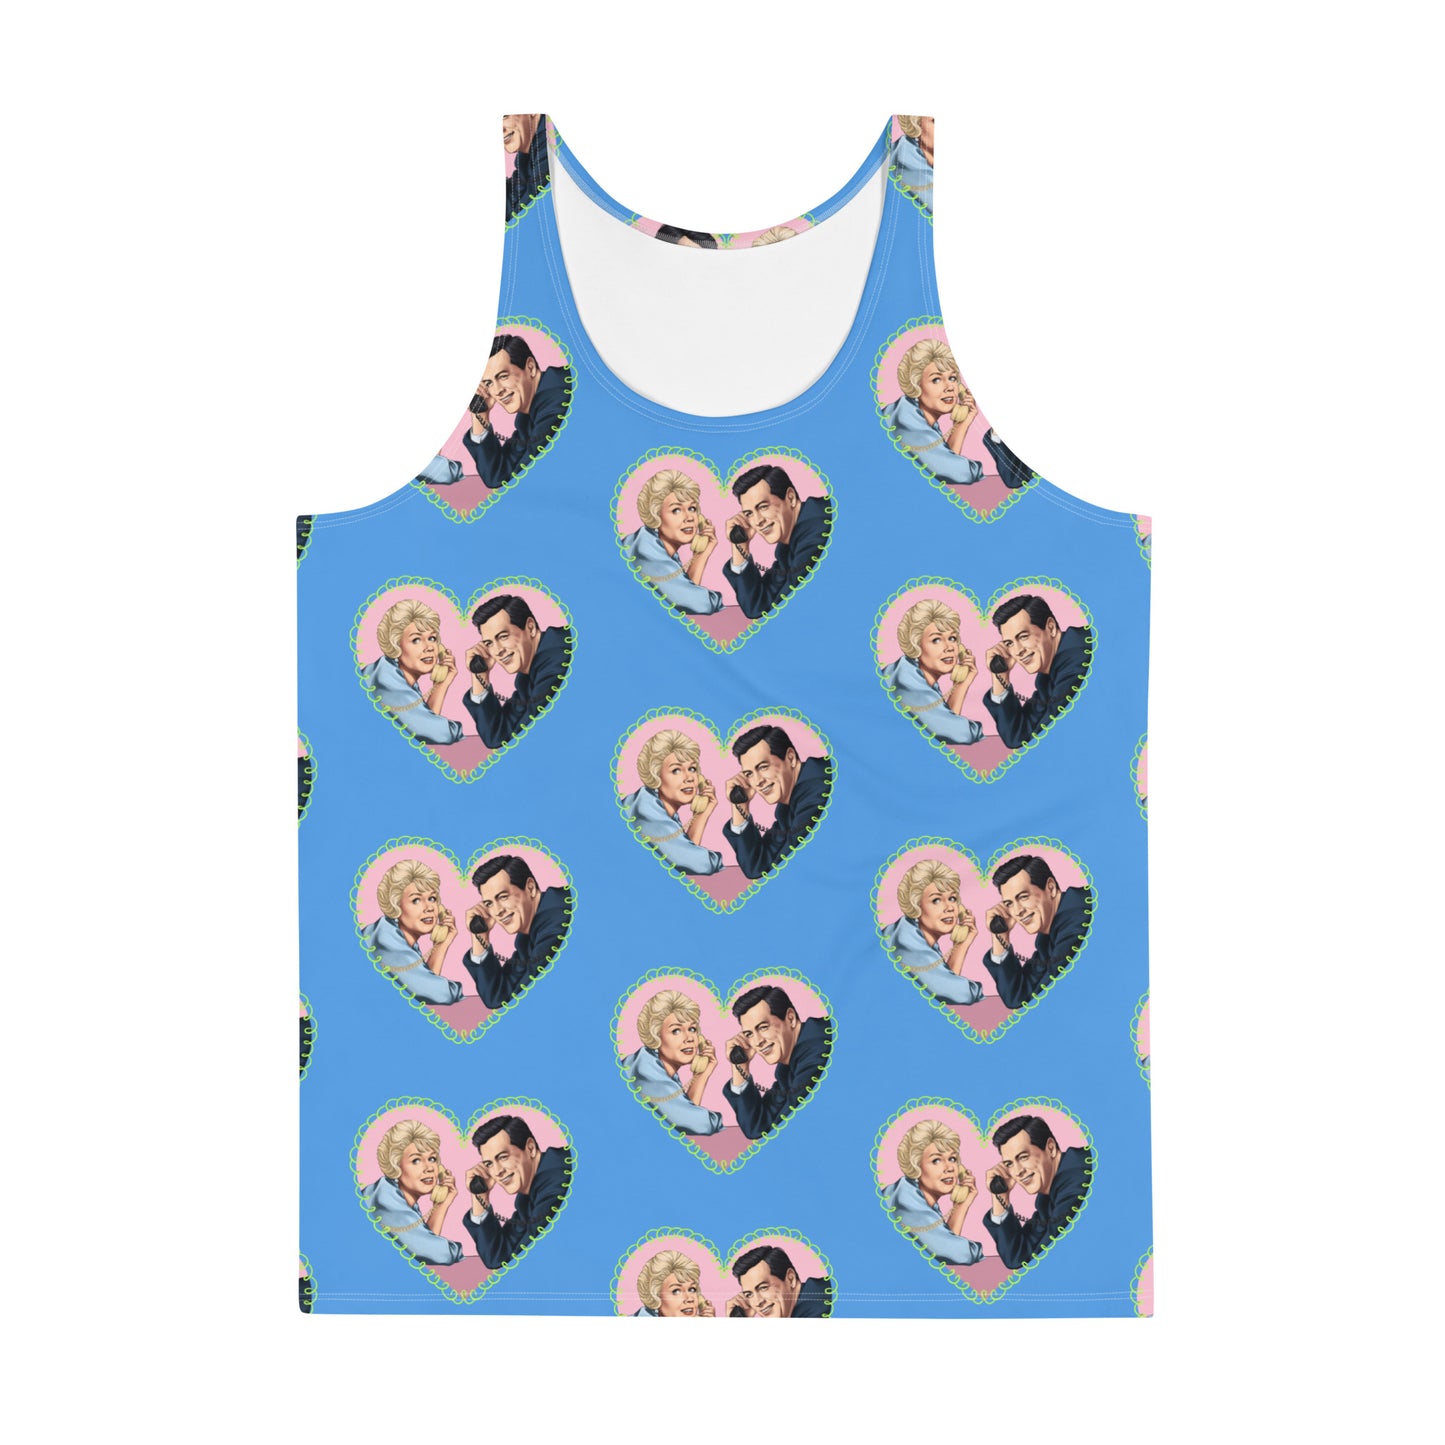 "The Party Line" Unisex Tank Top